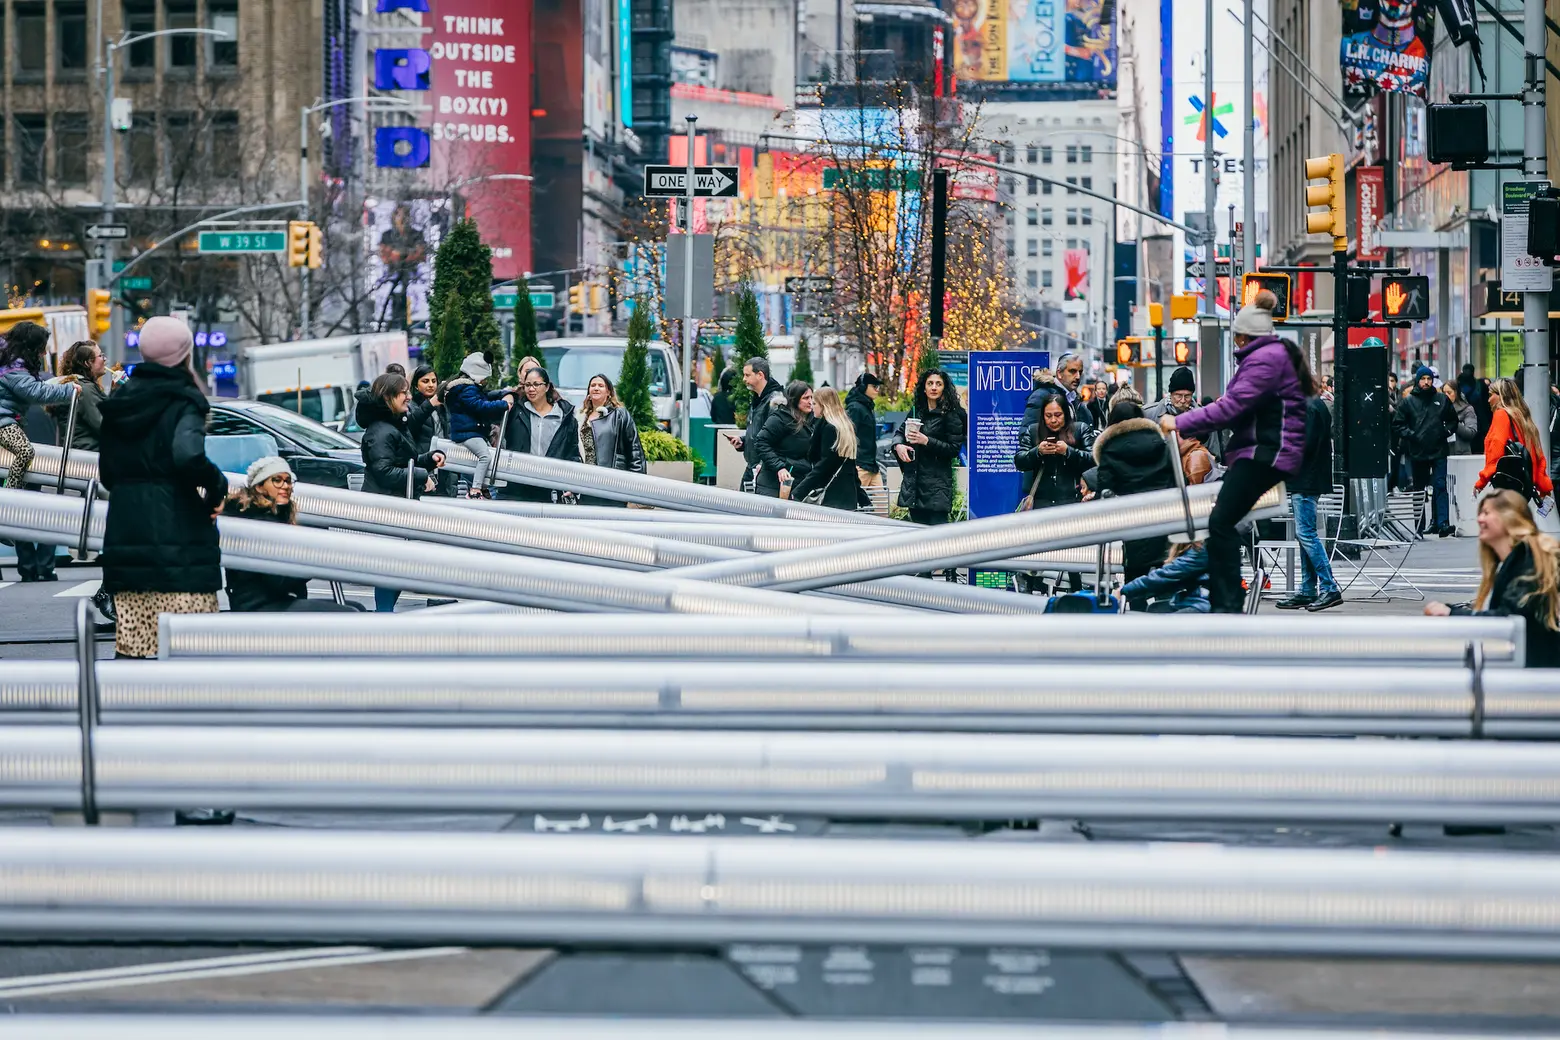 New public art installation brings illuminated, interactive seesaws to Midtown West